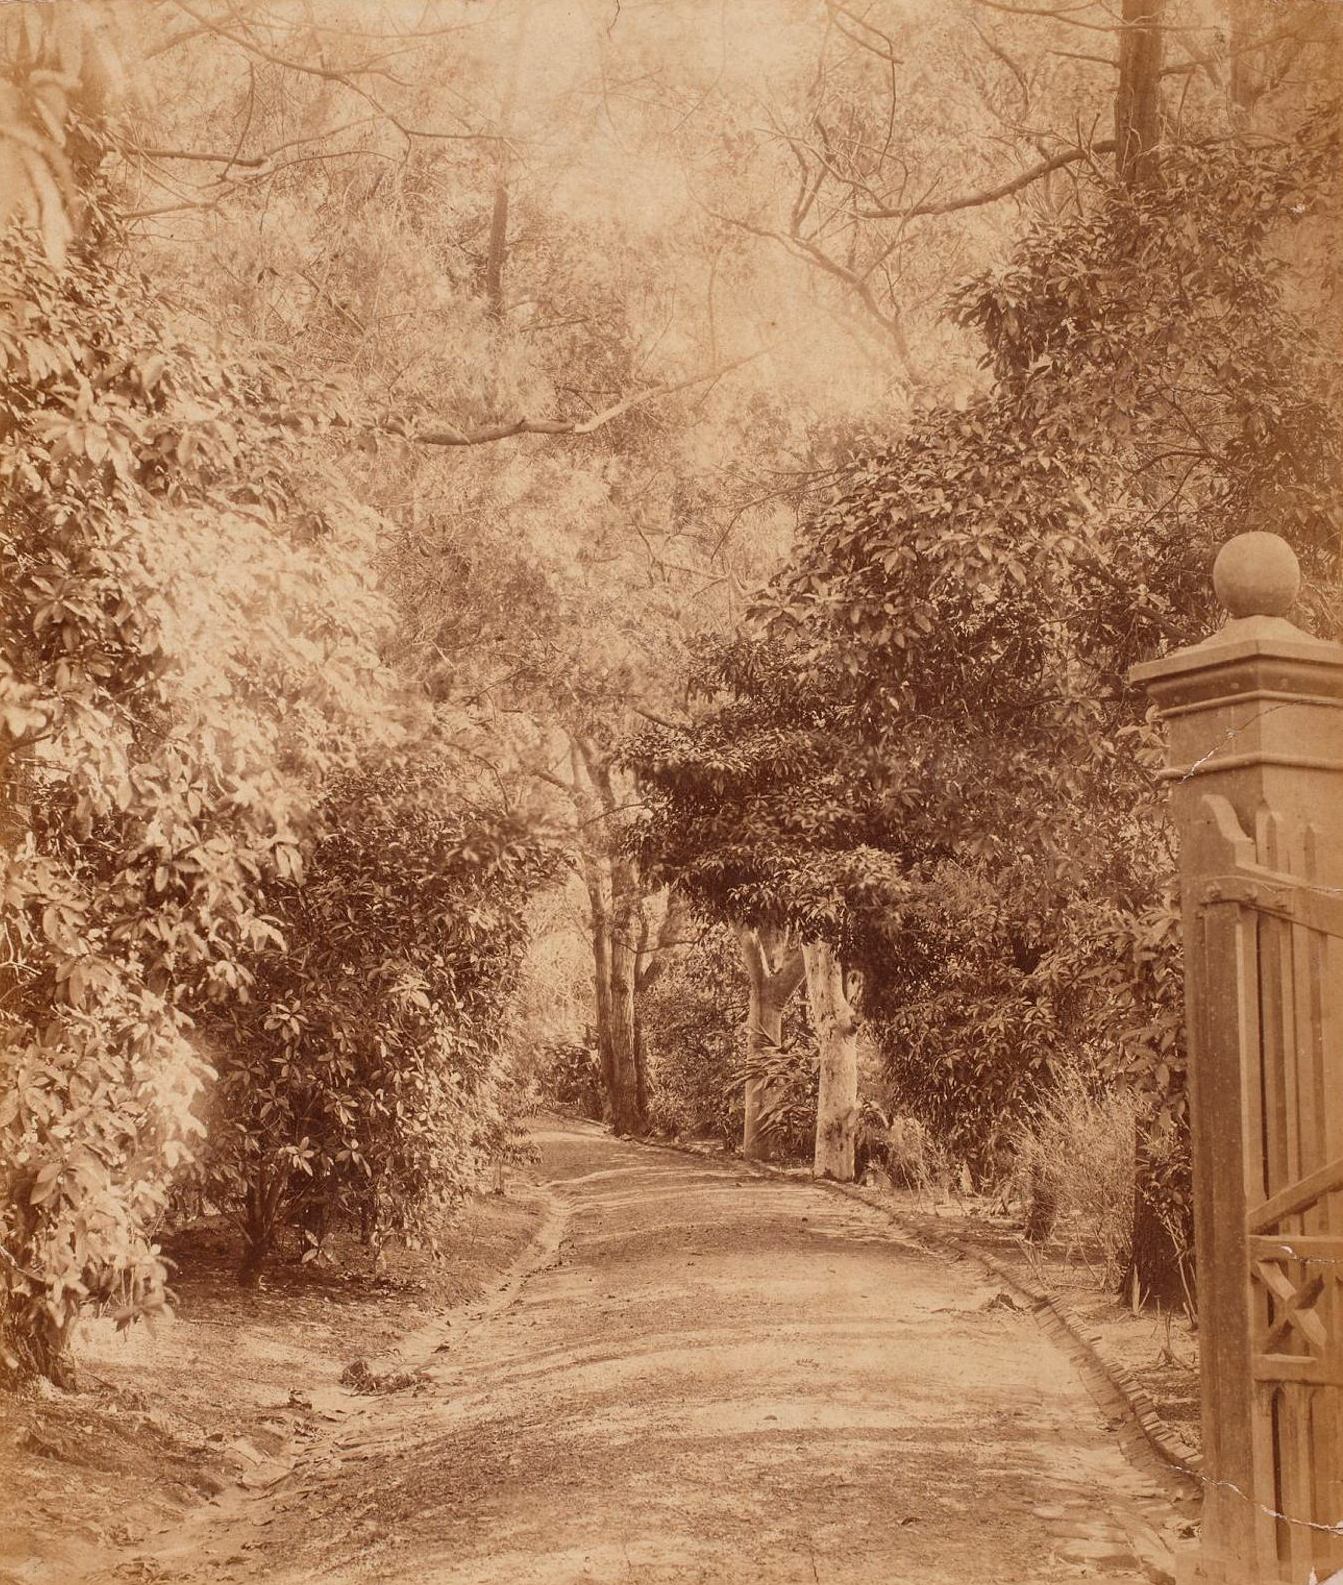 Carriage drive gate, Clifton, Kirribilli Point, around 1888 / photographer unknown